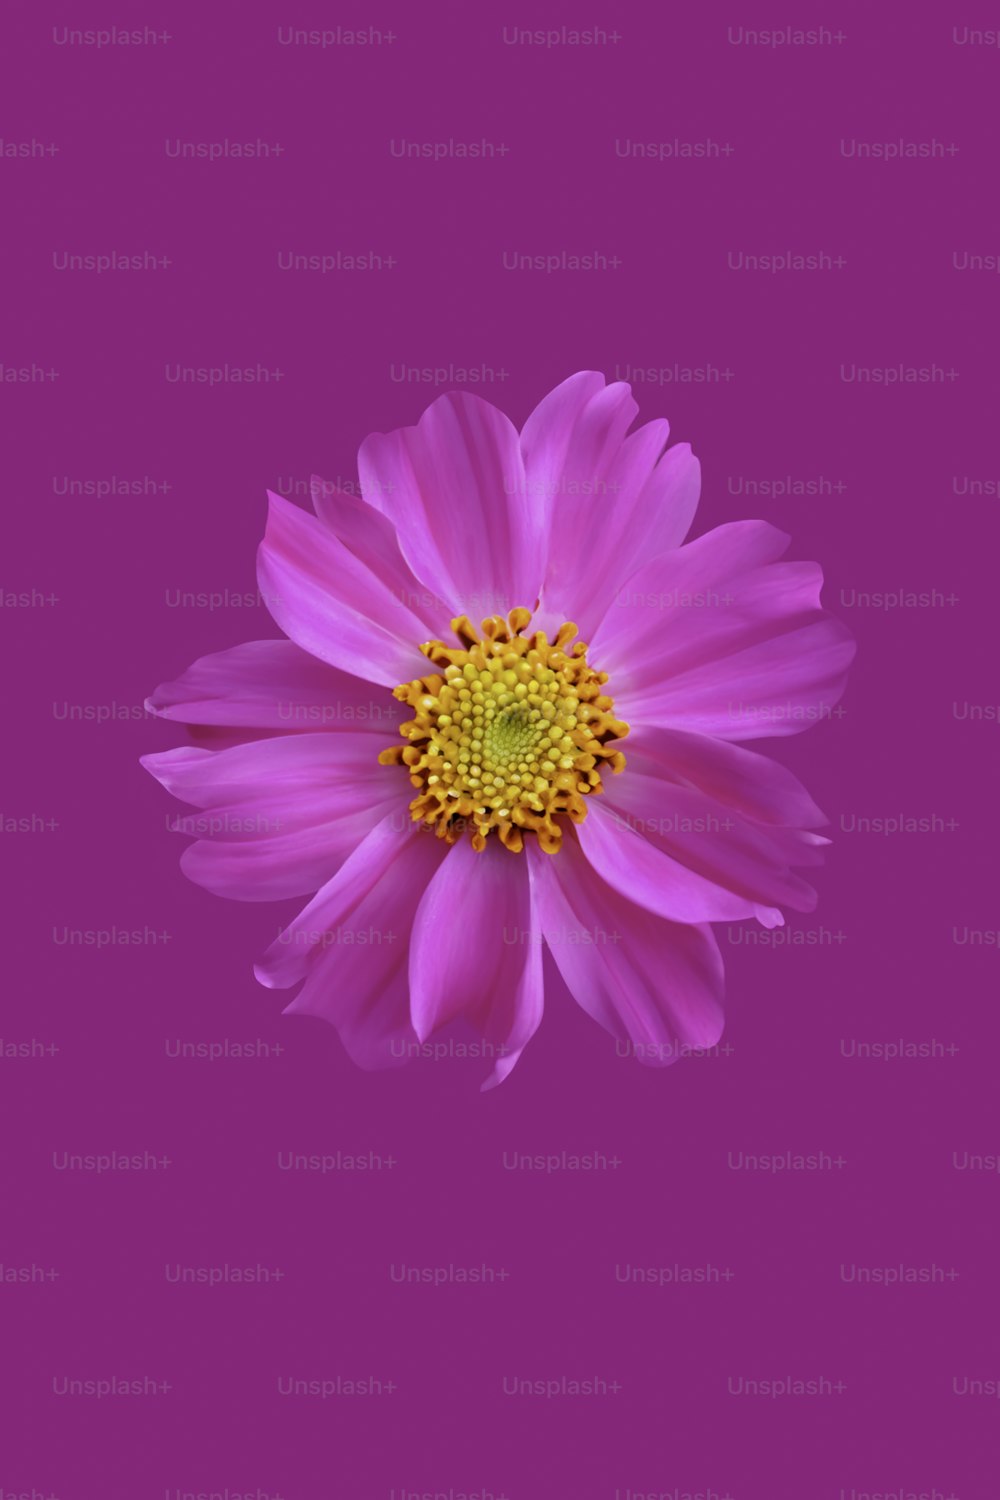 a pink flower with a yellow center on a pink background